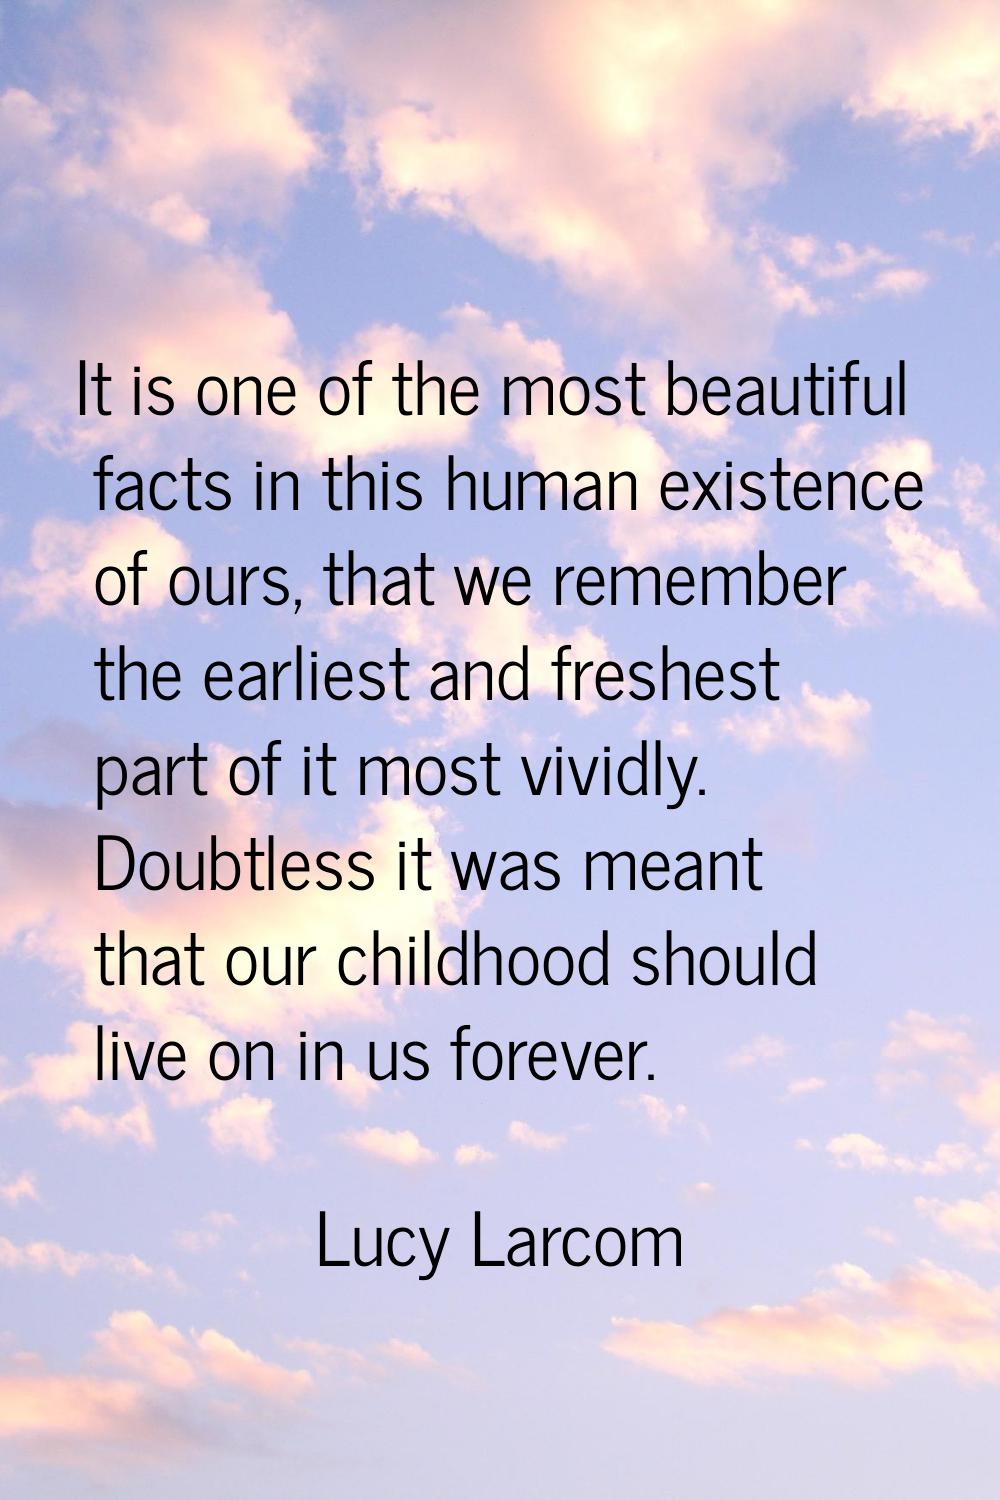 It is one of the most beautiful facts in this human existence of ours, that we remember the earlies